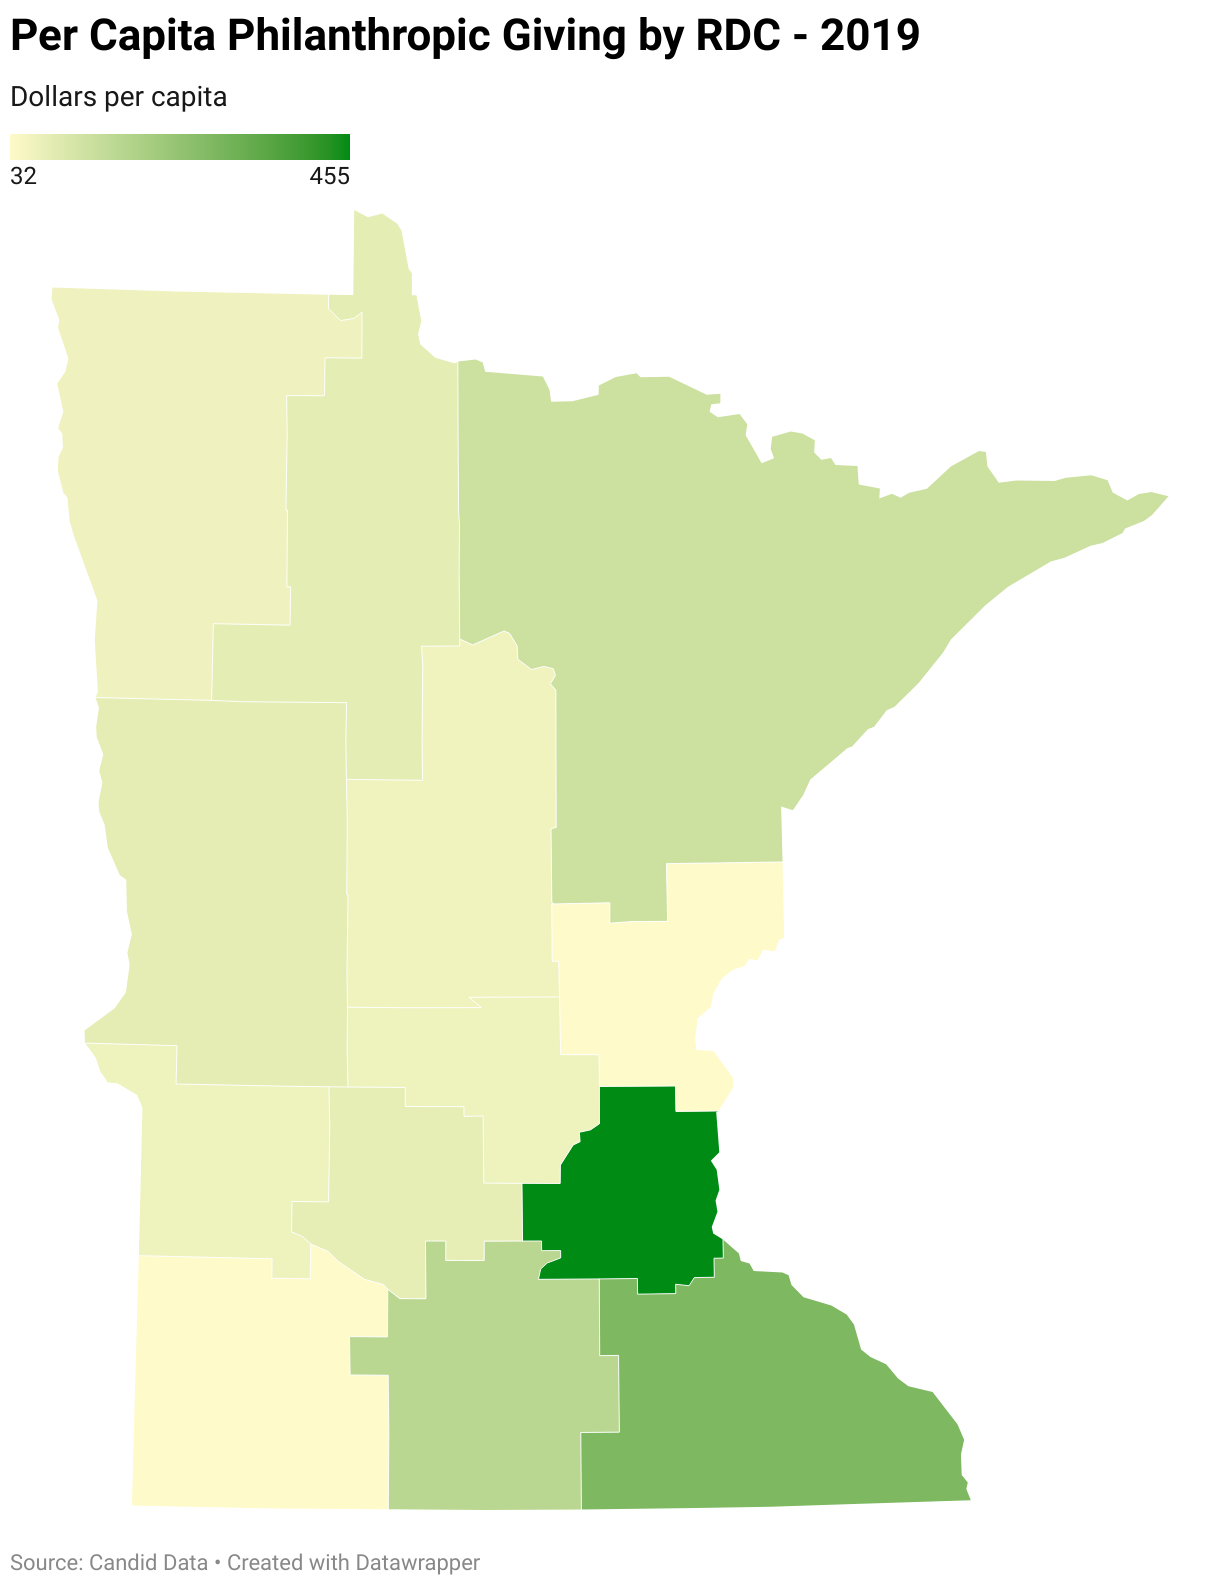 Map of Minnesota showing per capita giving in 13 regions across the state